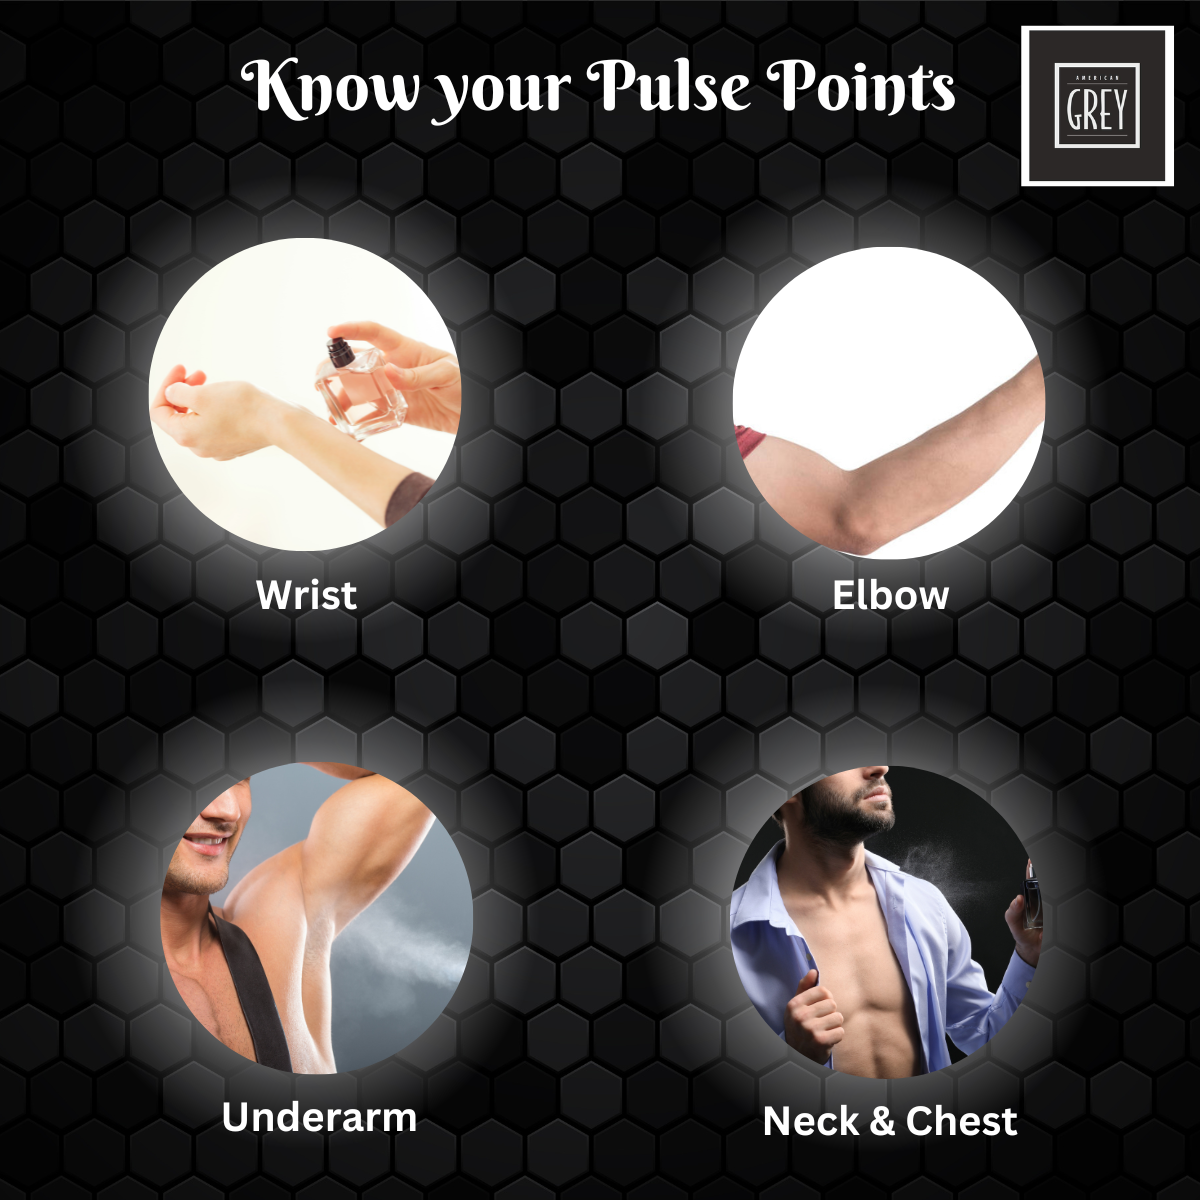 know your pulse points, pulse points, american grey after dark deo, deo spray for him, what are the pulse points to apply deodorant for men, men deodorant, deodorant spray for men, what are the pulse points for perfume male, what is the best way to apply deodorant for men,where are male pulse points, deodorant tips for men, deodorant tips for male in india, deo pulse points myths, best pulse points for deo male,  top rated mens deo, men grooming essential, men fragrance for winter season, best deo for cold weather, popular winter deodorant for men, best smelling deo for autumn season